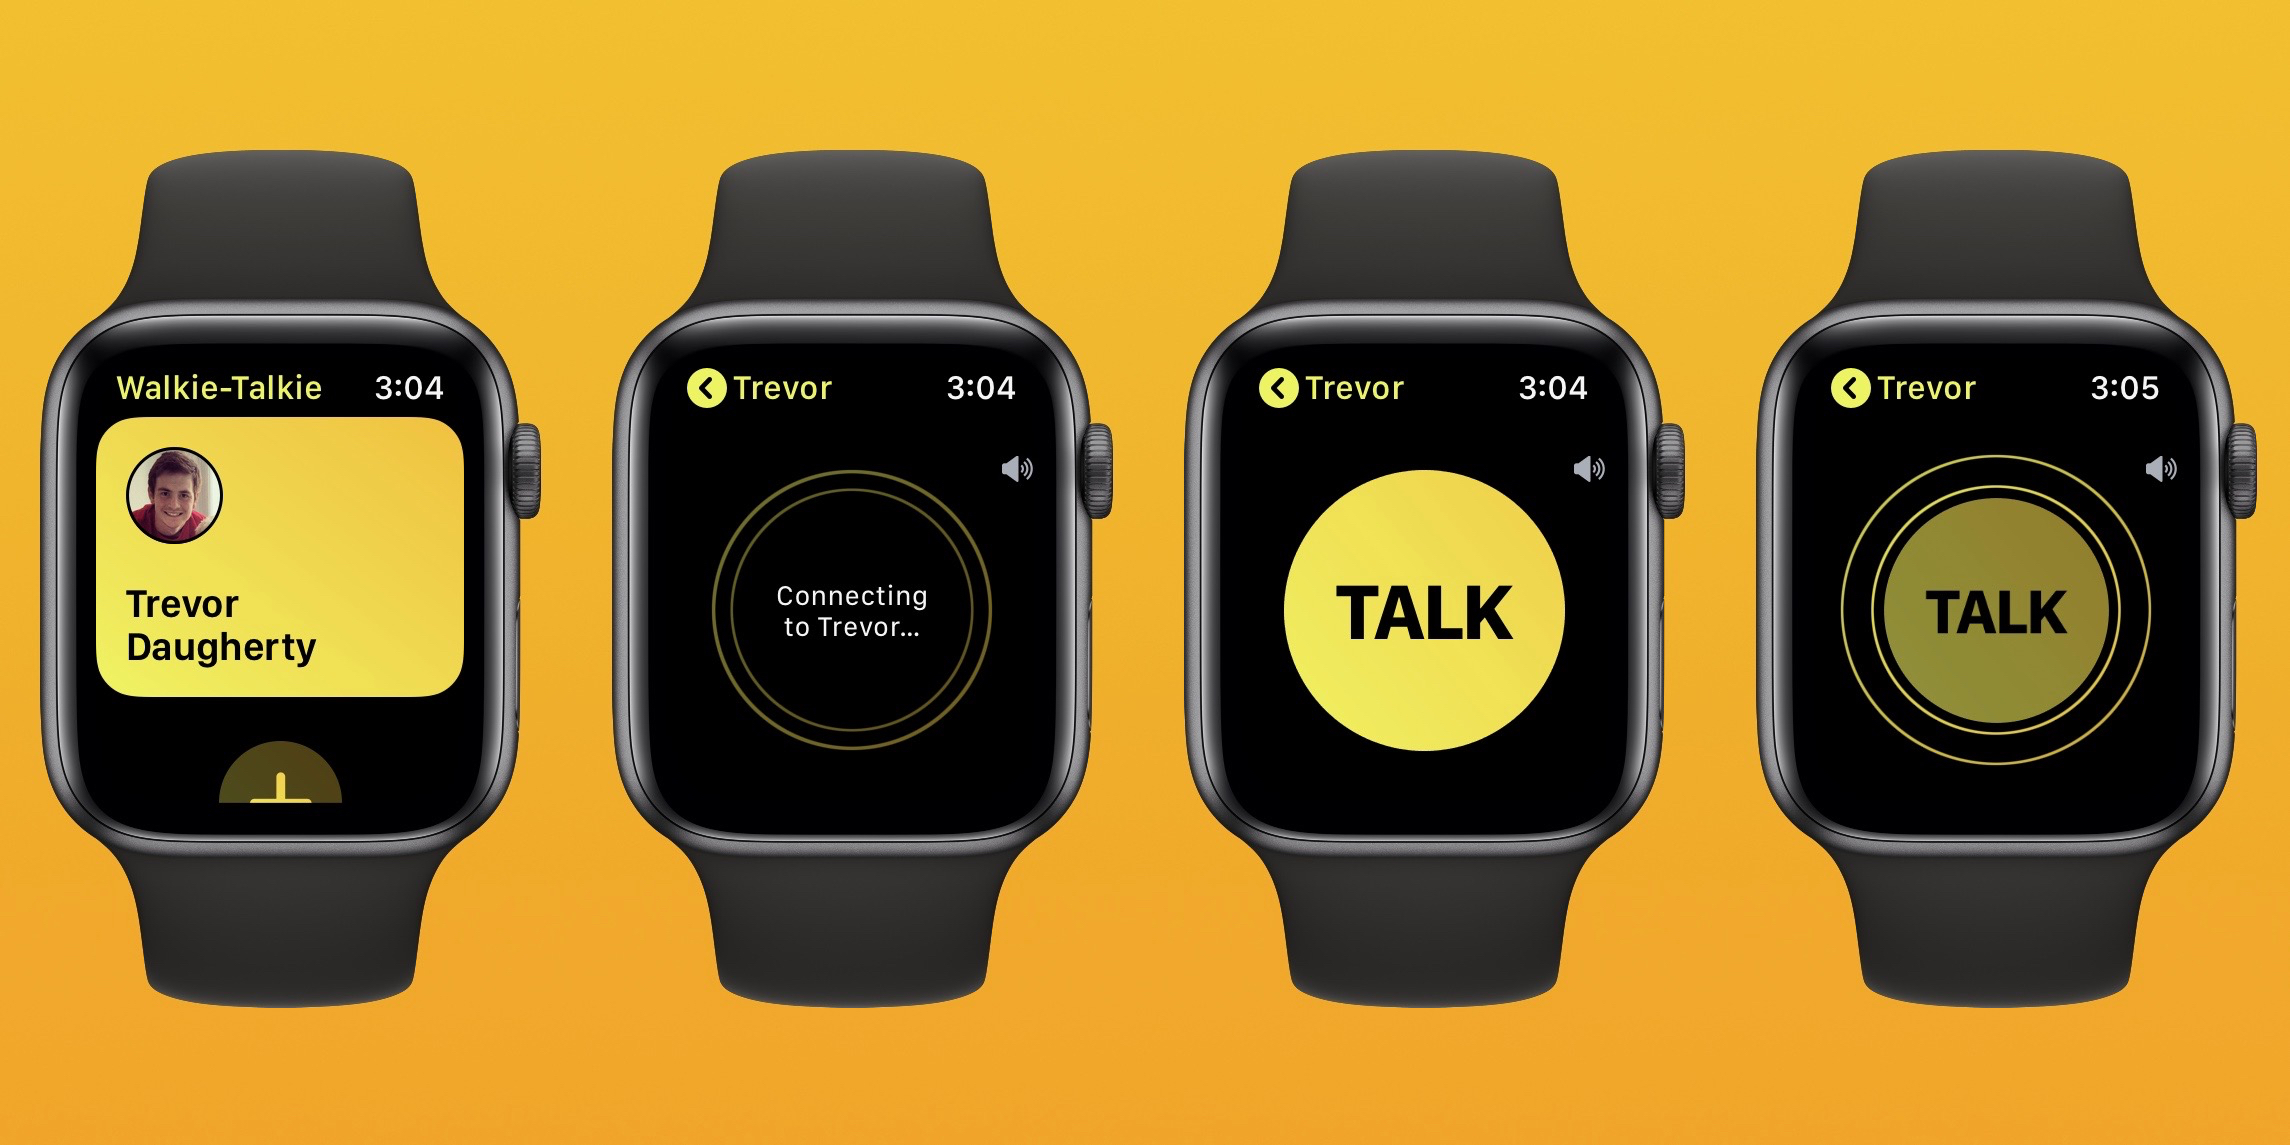 Raad Shetland arm How to use Tap to Talk with Walkie-Talkie on Apple Watch - 9to5Mac